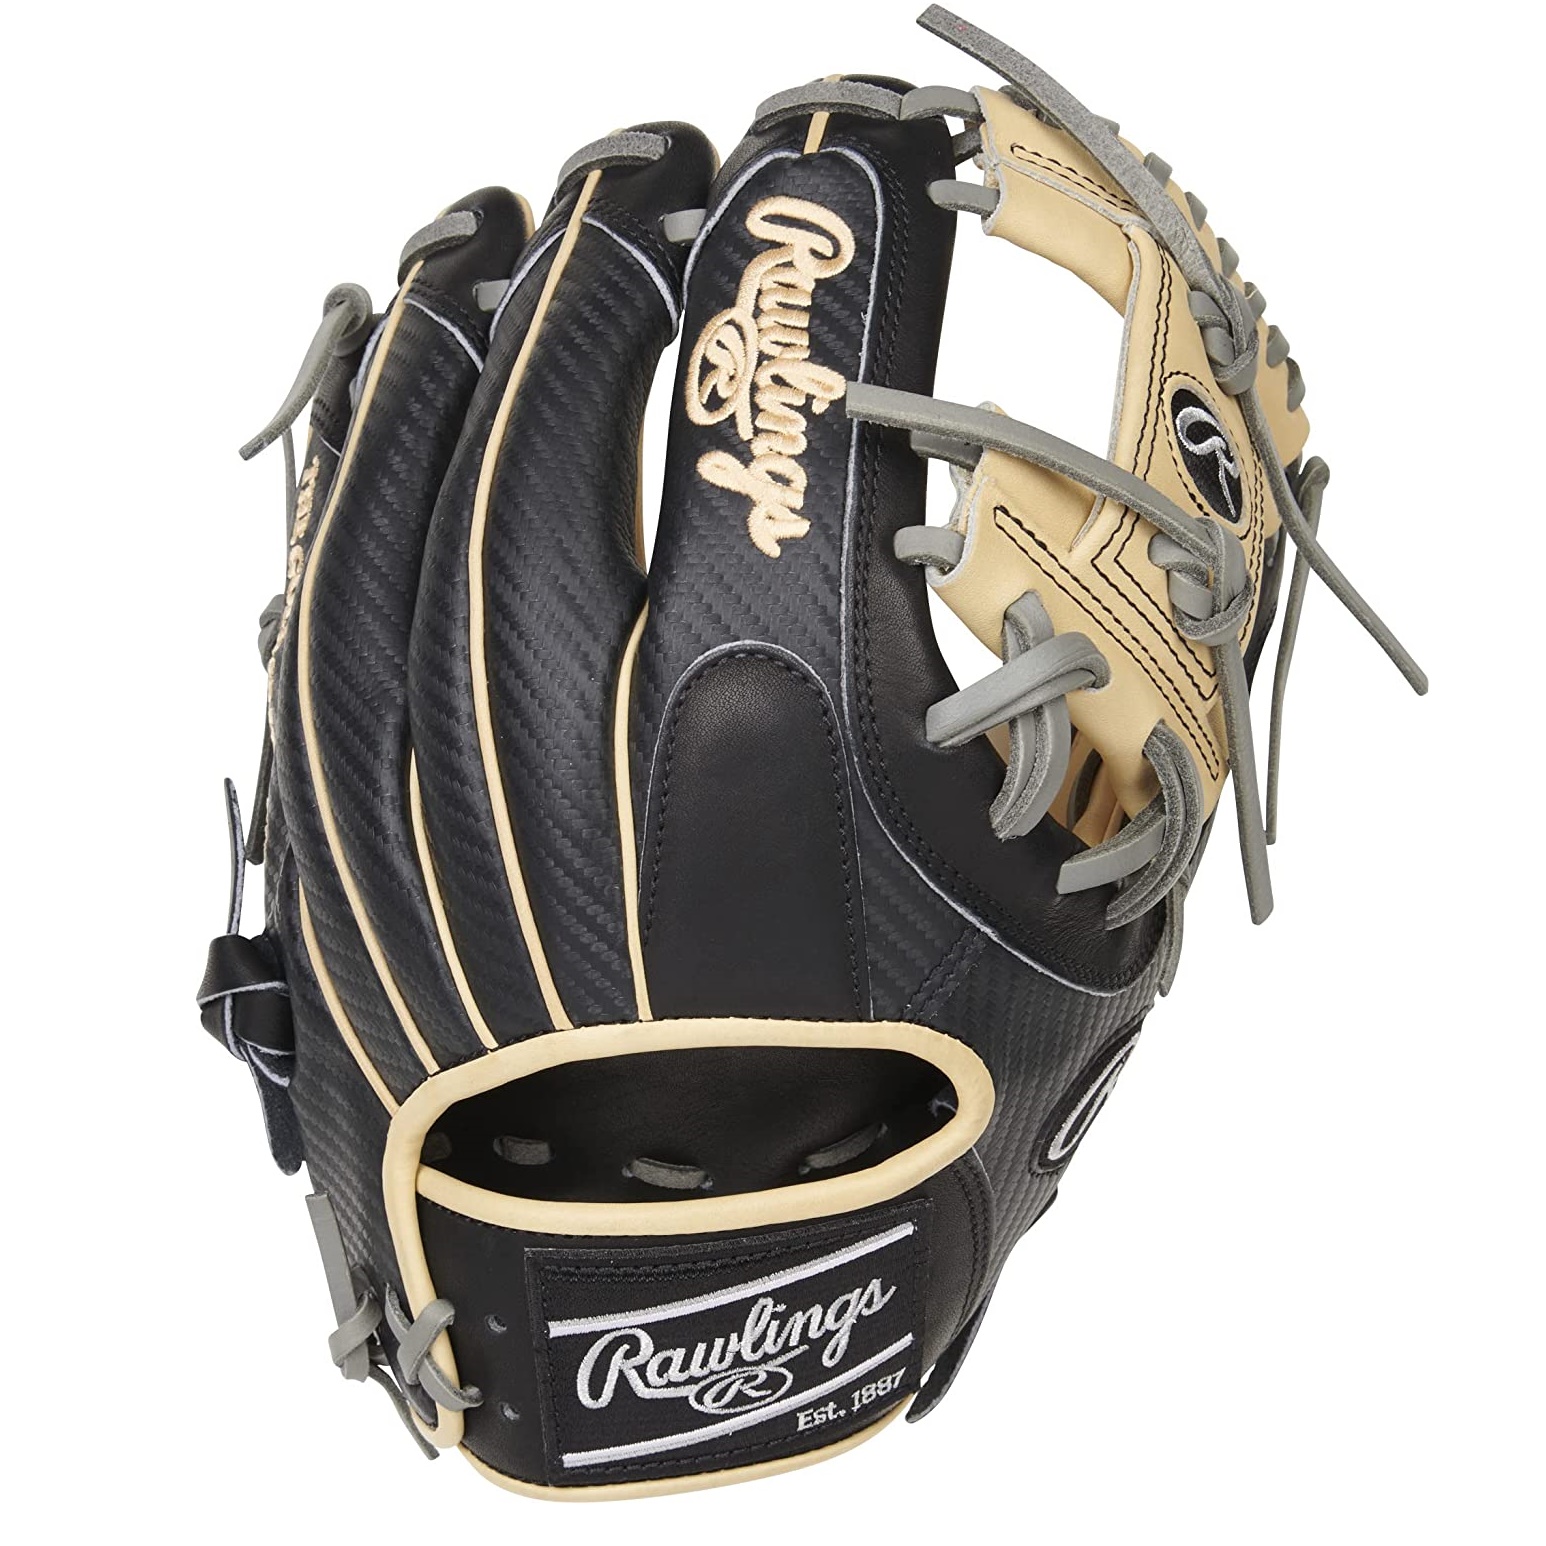 rawlings-heart-of-the-hide-11-5-inch-baseball-glove-pro-i-web-right-hand-throw-1 PRO204-2CBCF-RightHandThrow Rawlings  The Rawlings PRO204-2CBCF-RightHandThrow Heart of the Hide Hyper Shell 11.5-inch baseball